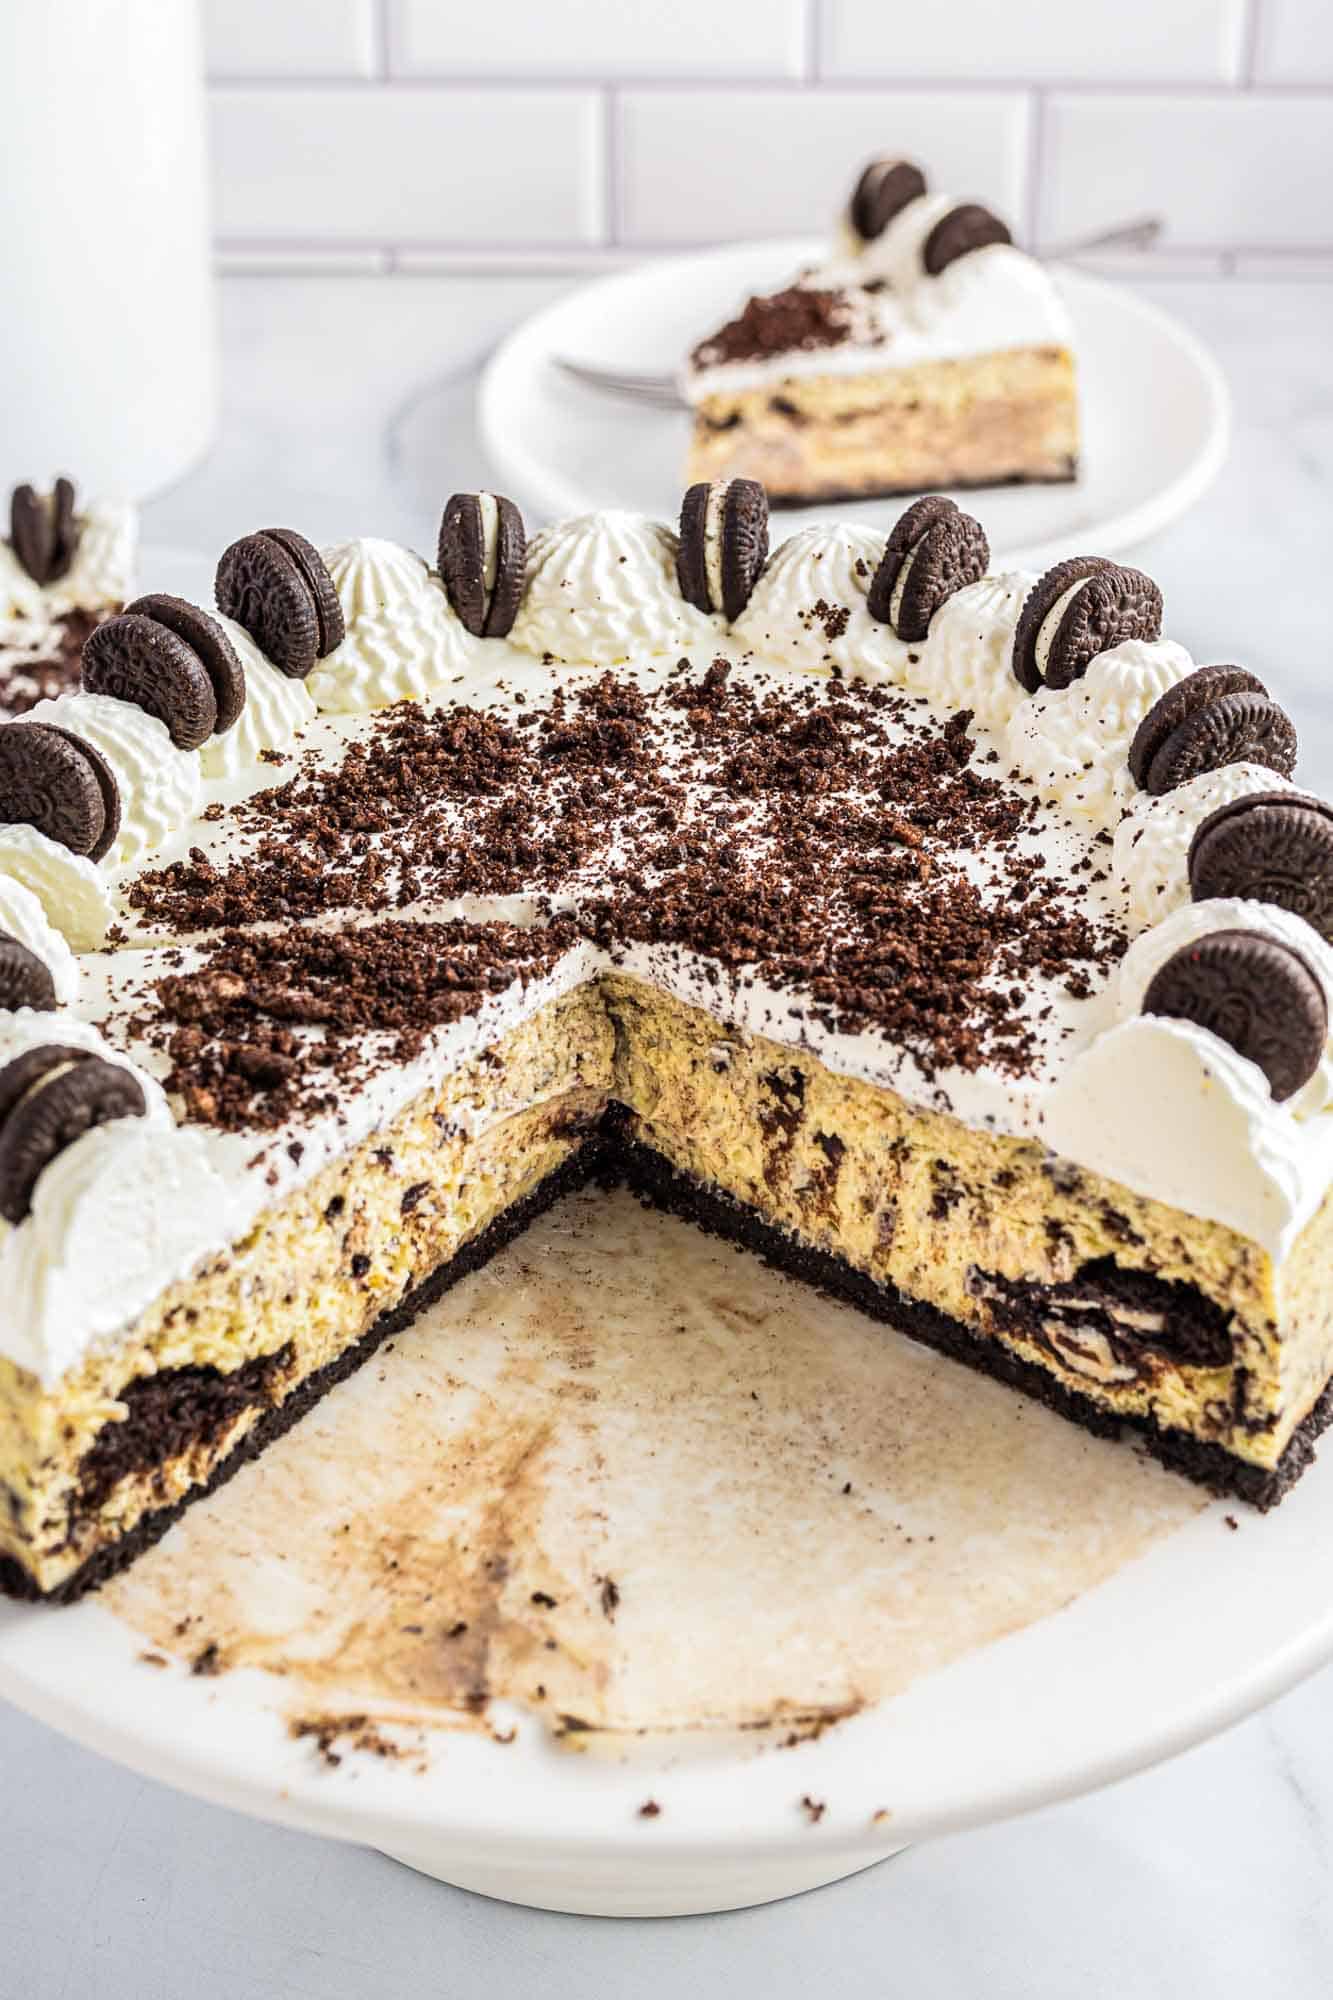 Sliced baked oreo cheesecake to show the texture inside of the cake, on a white cake stand.